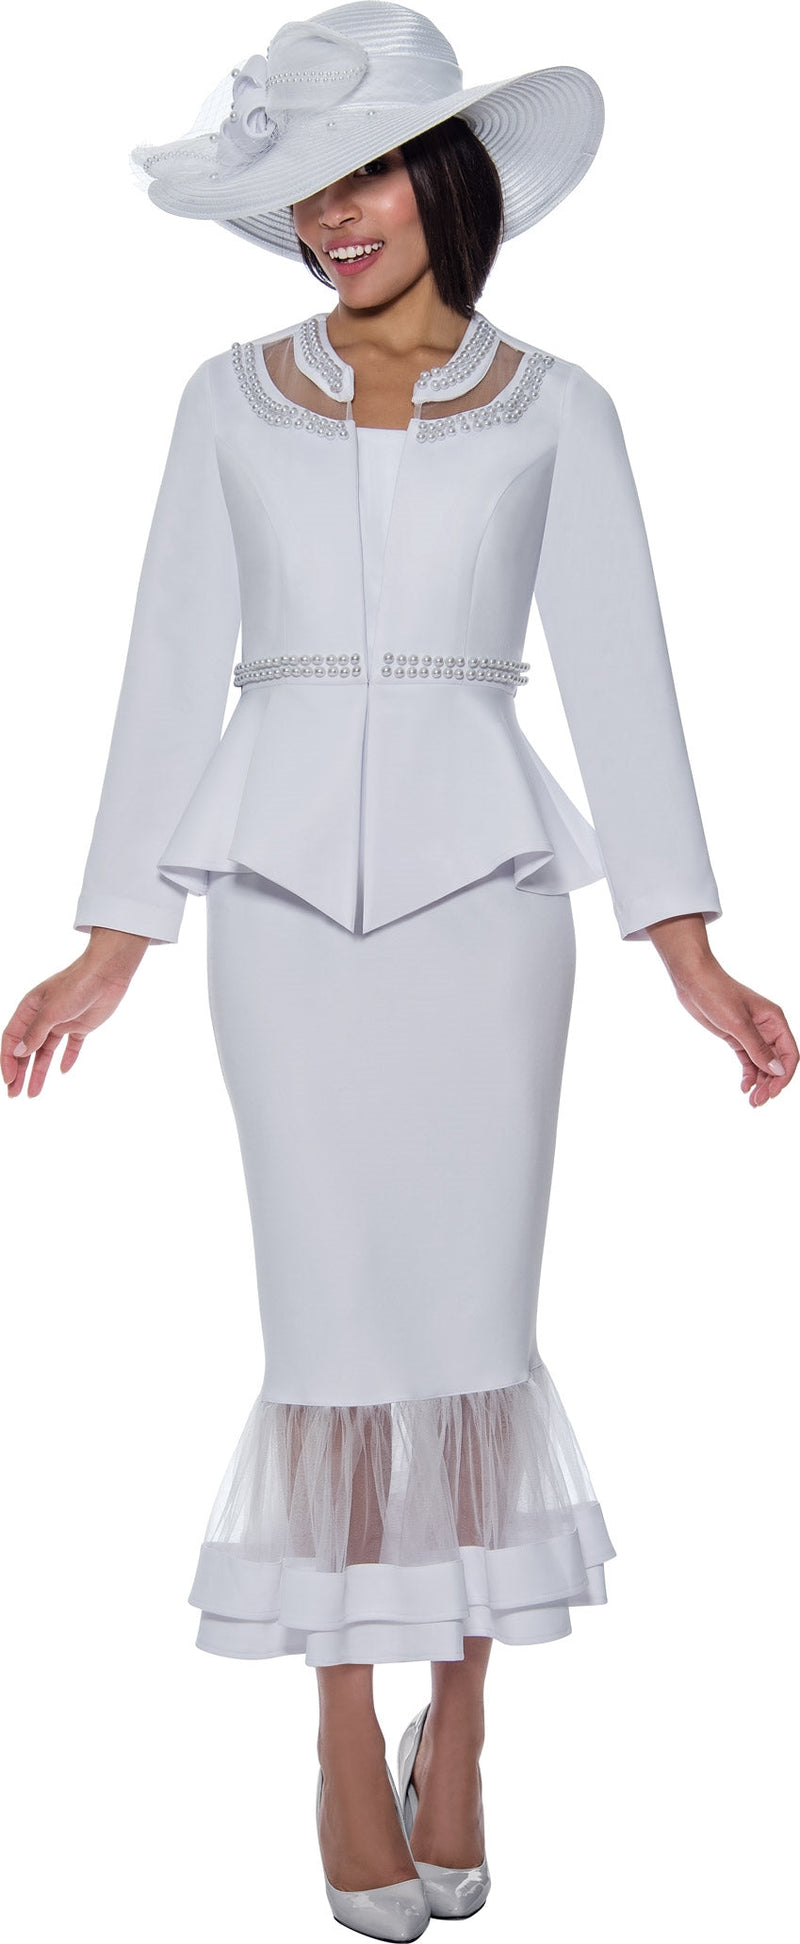 GMI Church Suit 9512-White - Church Suits For Less